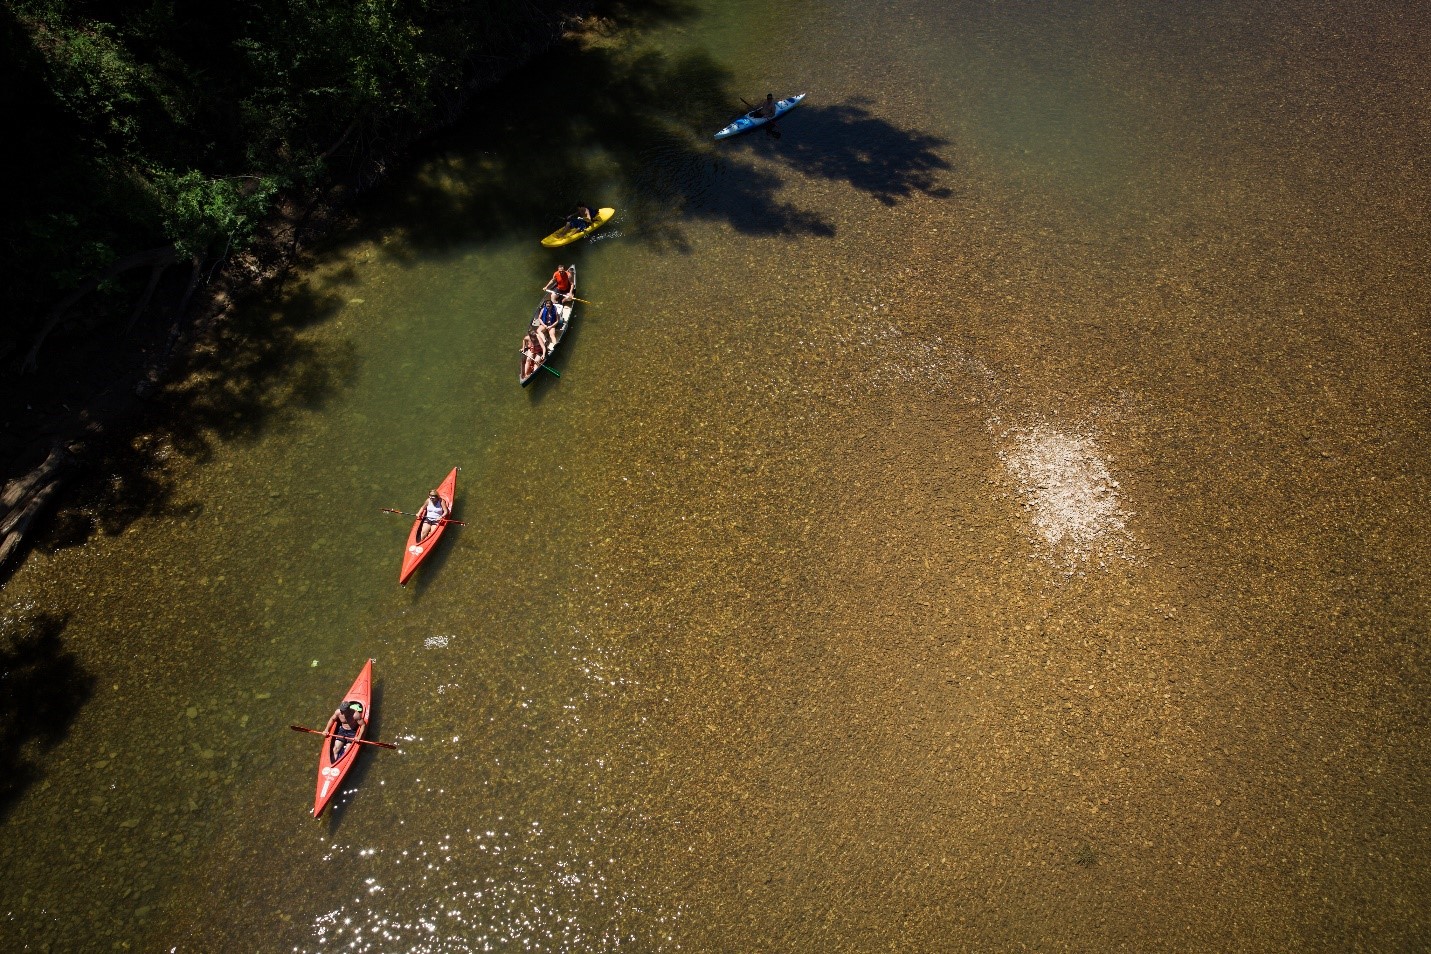 A view from above of two, solo, red kayaks in a line followed by a canoe with three paddlers, a yellow kayak and a blue kayak. The boats are in the water and brown gravel can be seen under the water. In the upper left corner of the image shadows from tree